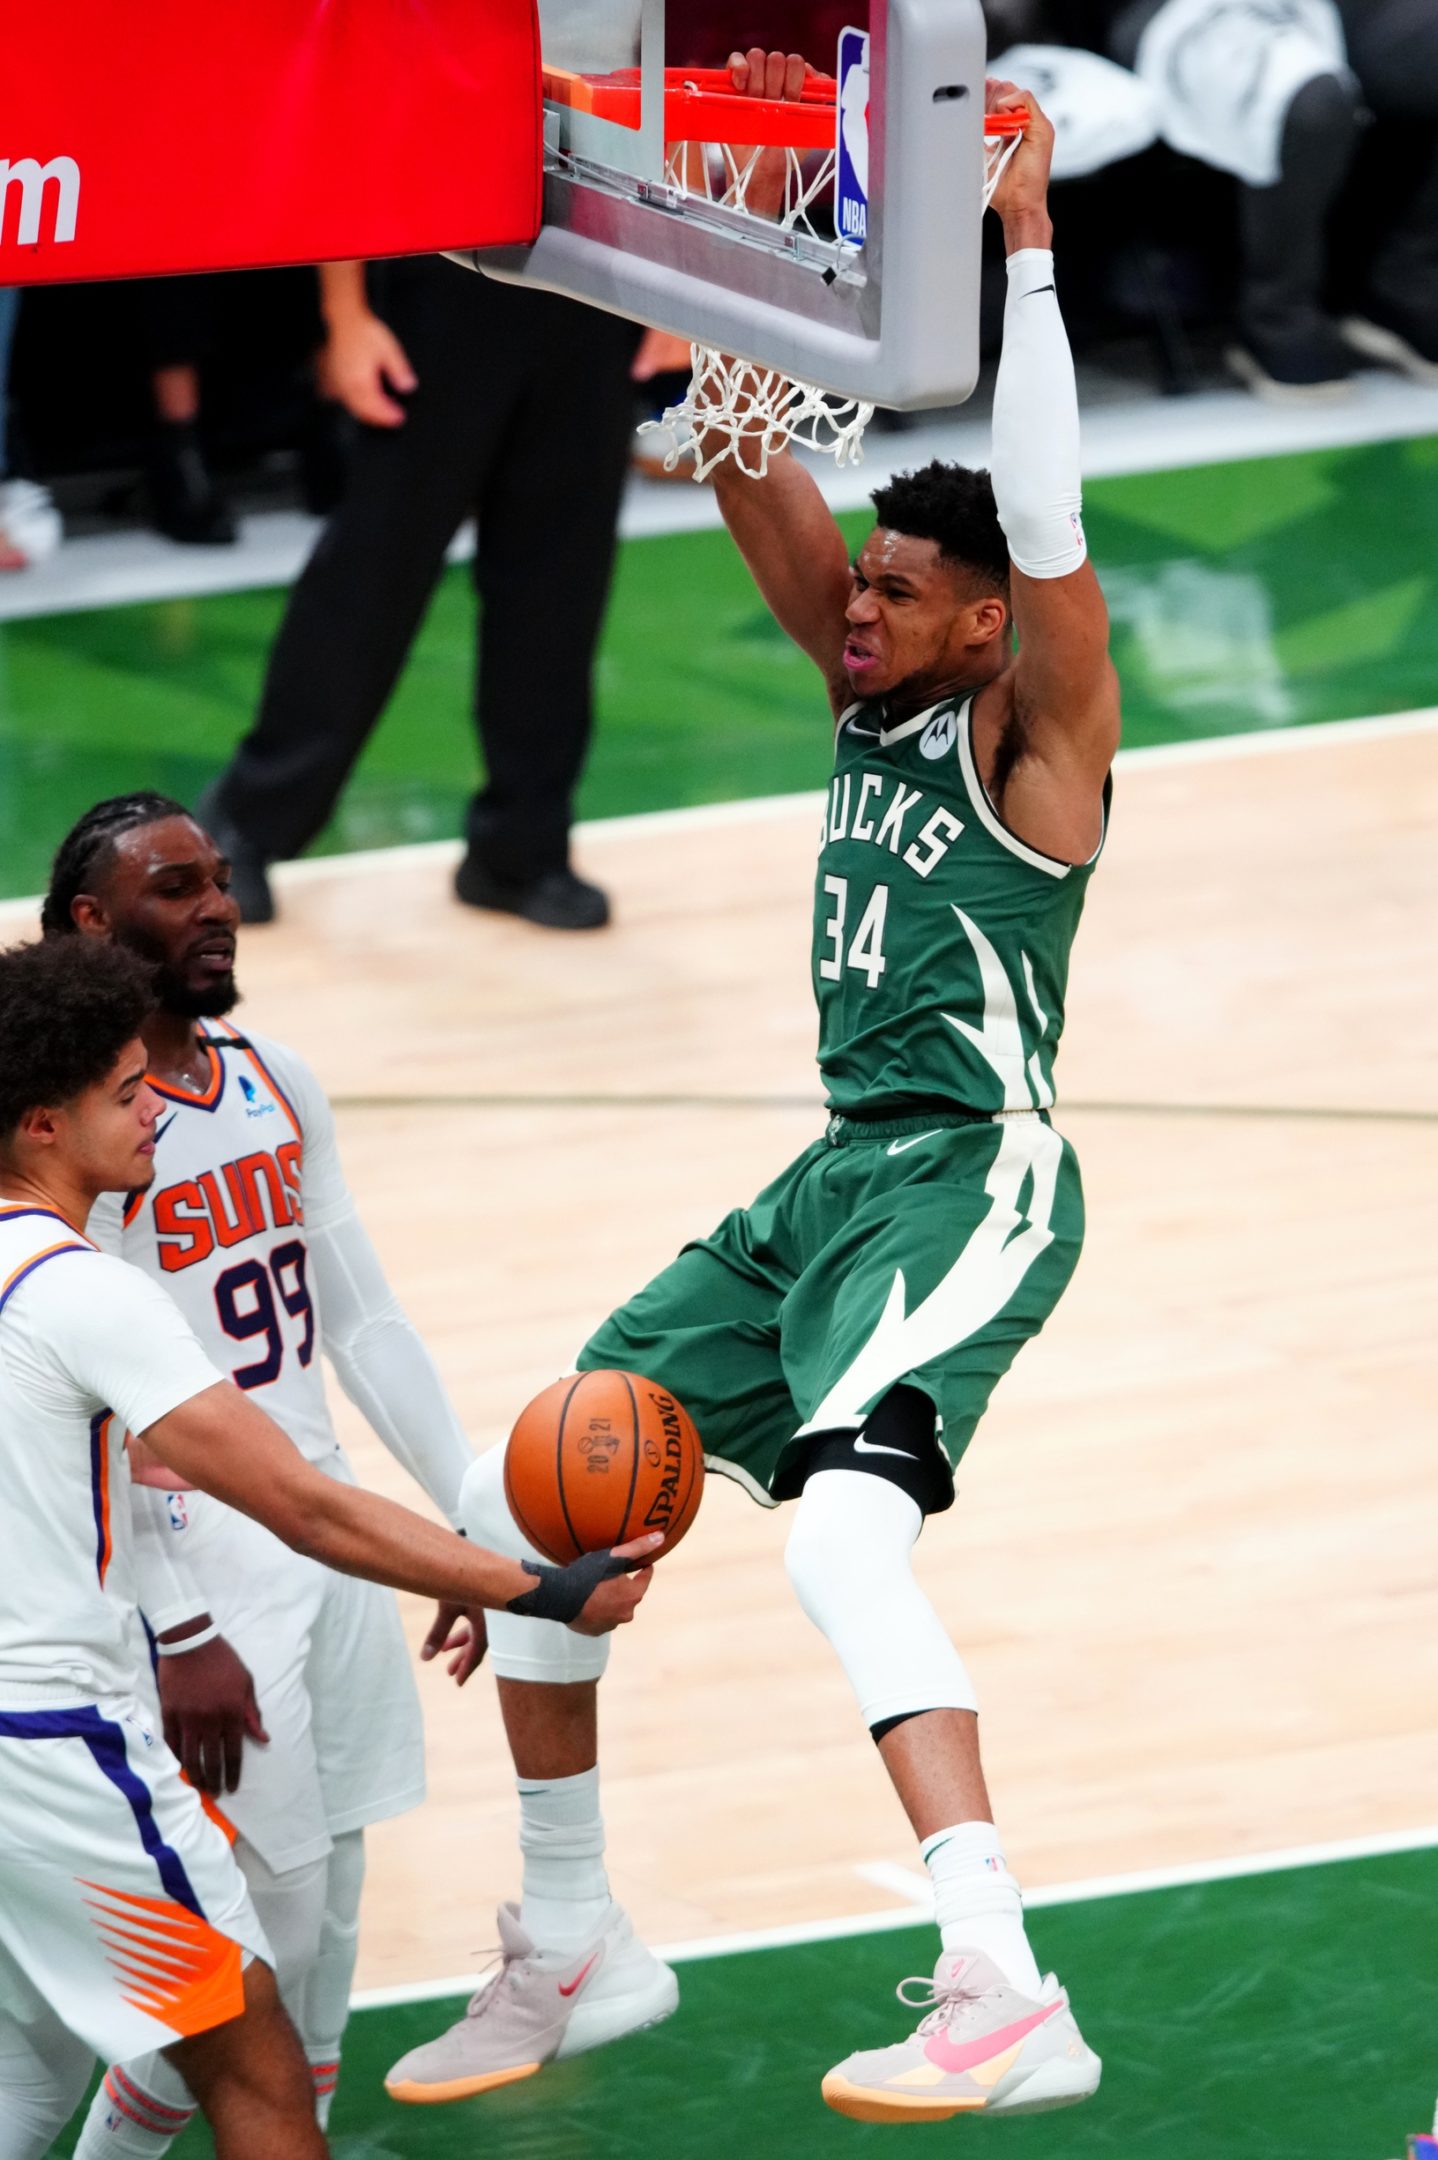 giannis earned edition jersey